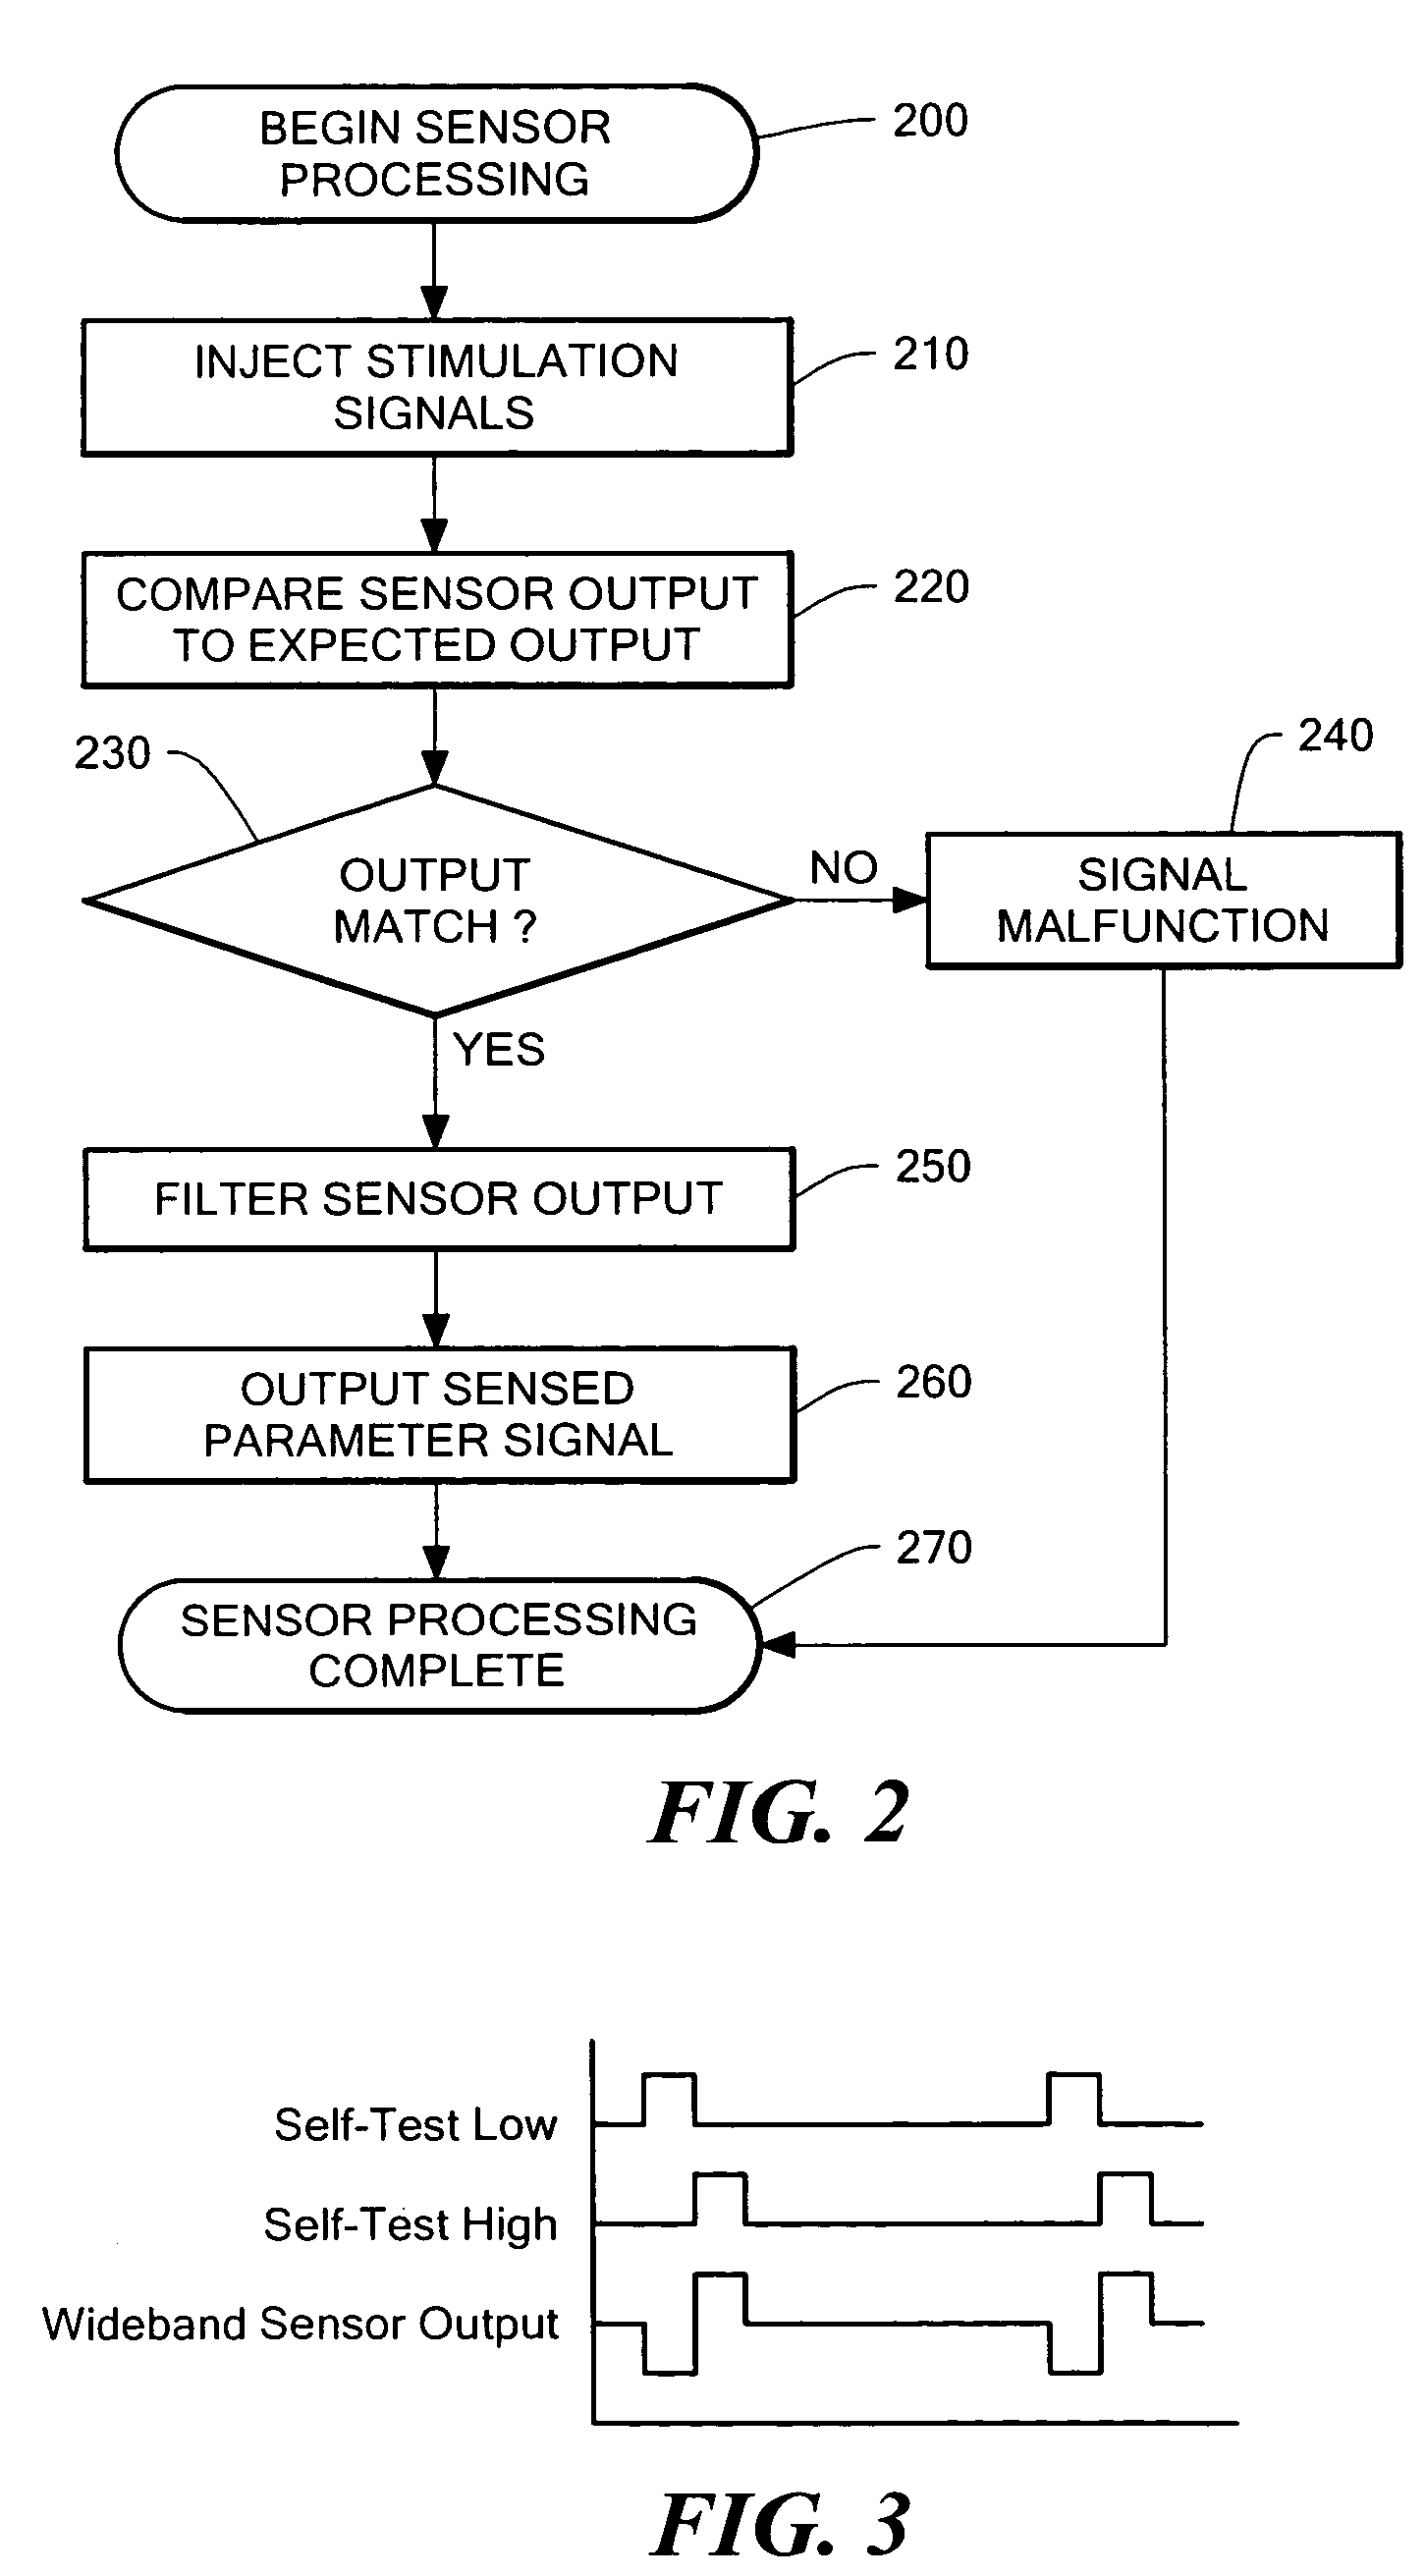 Method for continuous sensor self-test